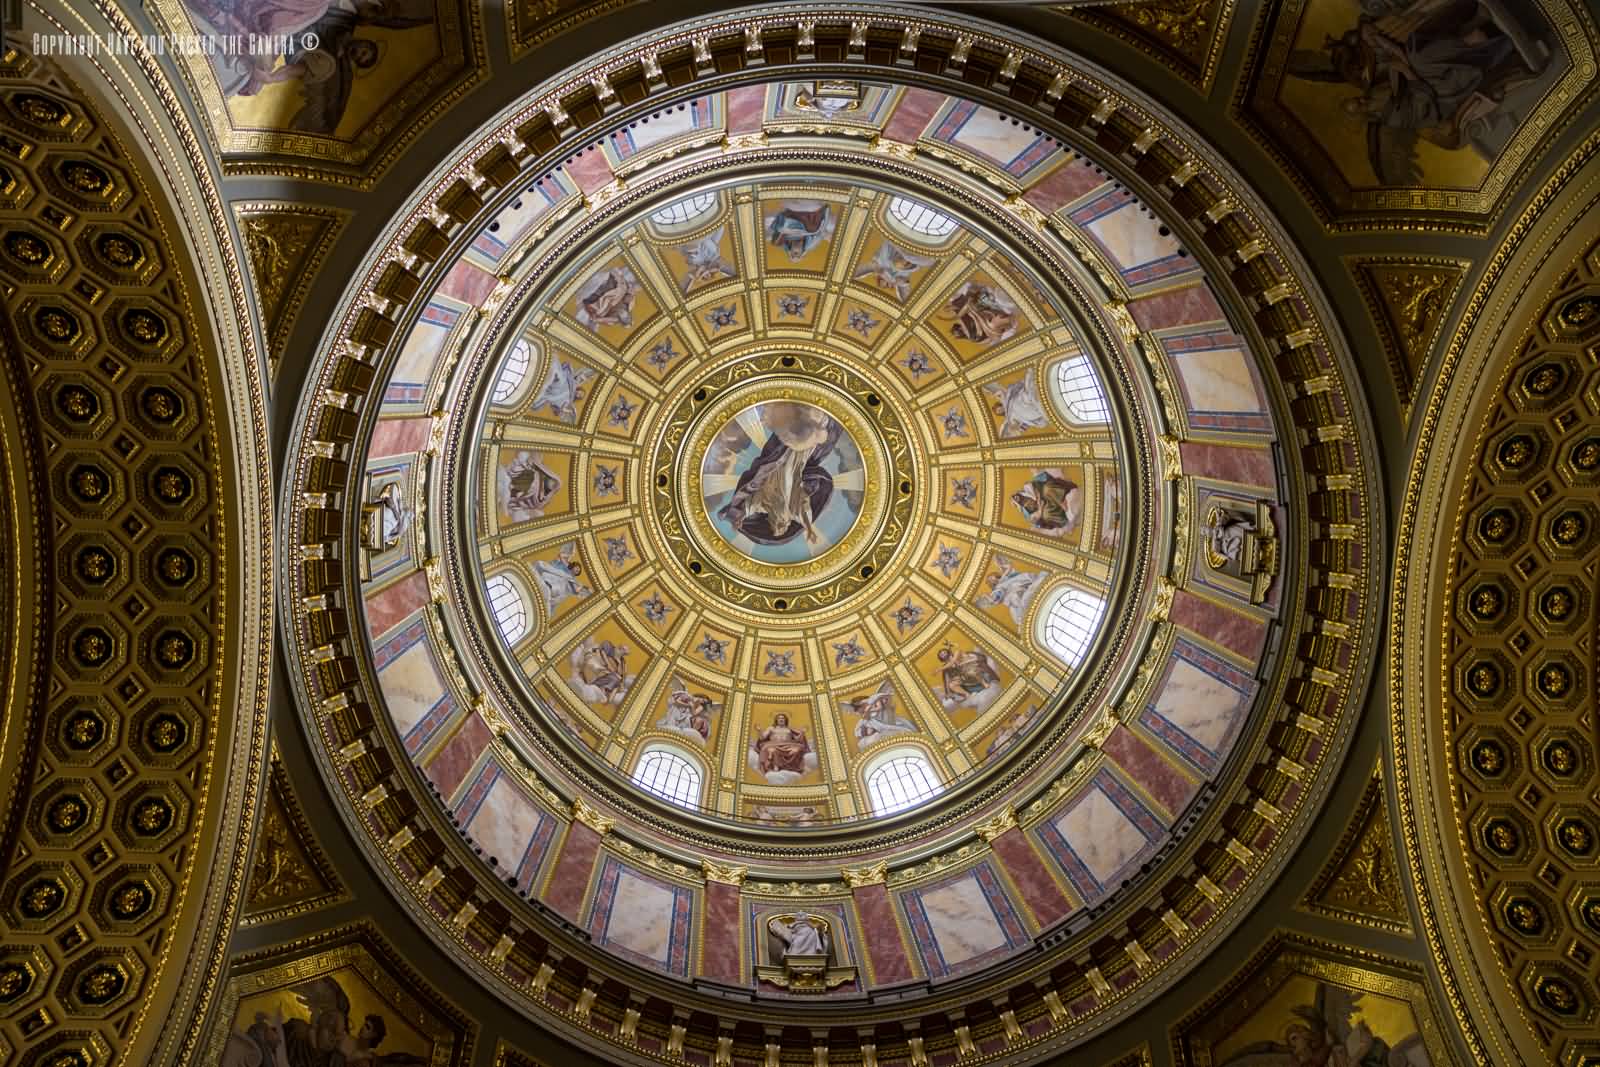 Beautiful Artwork Of The Dome Inside St. Stephen’s Basilica